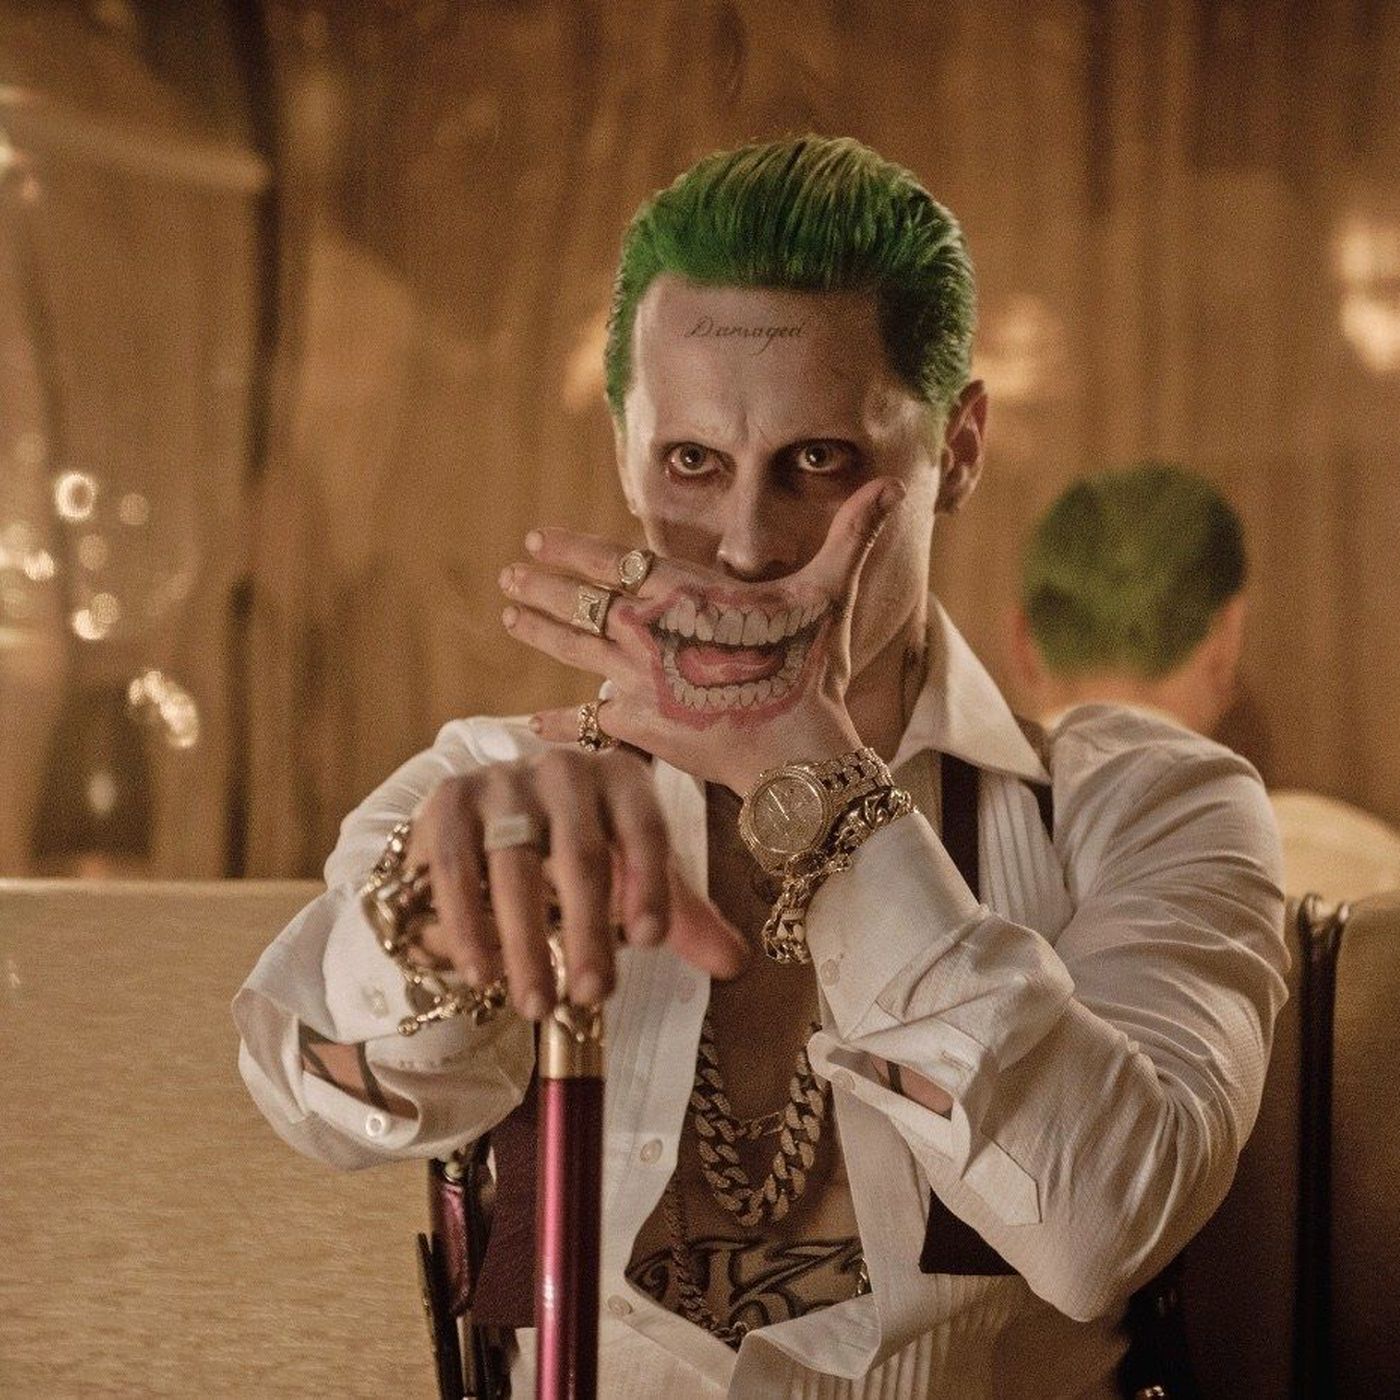 No Joker in The Suicide Squad?